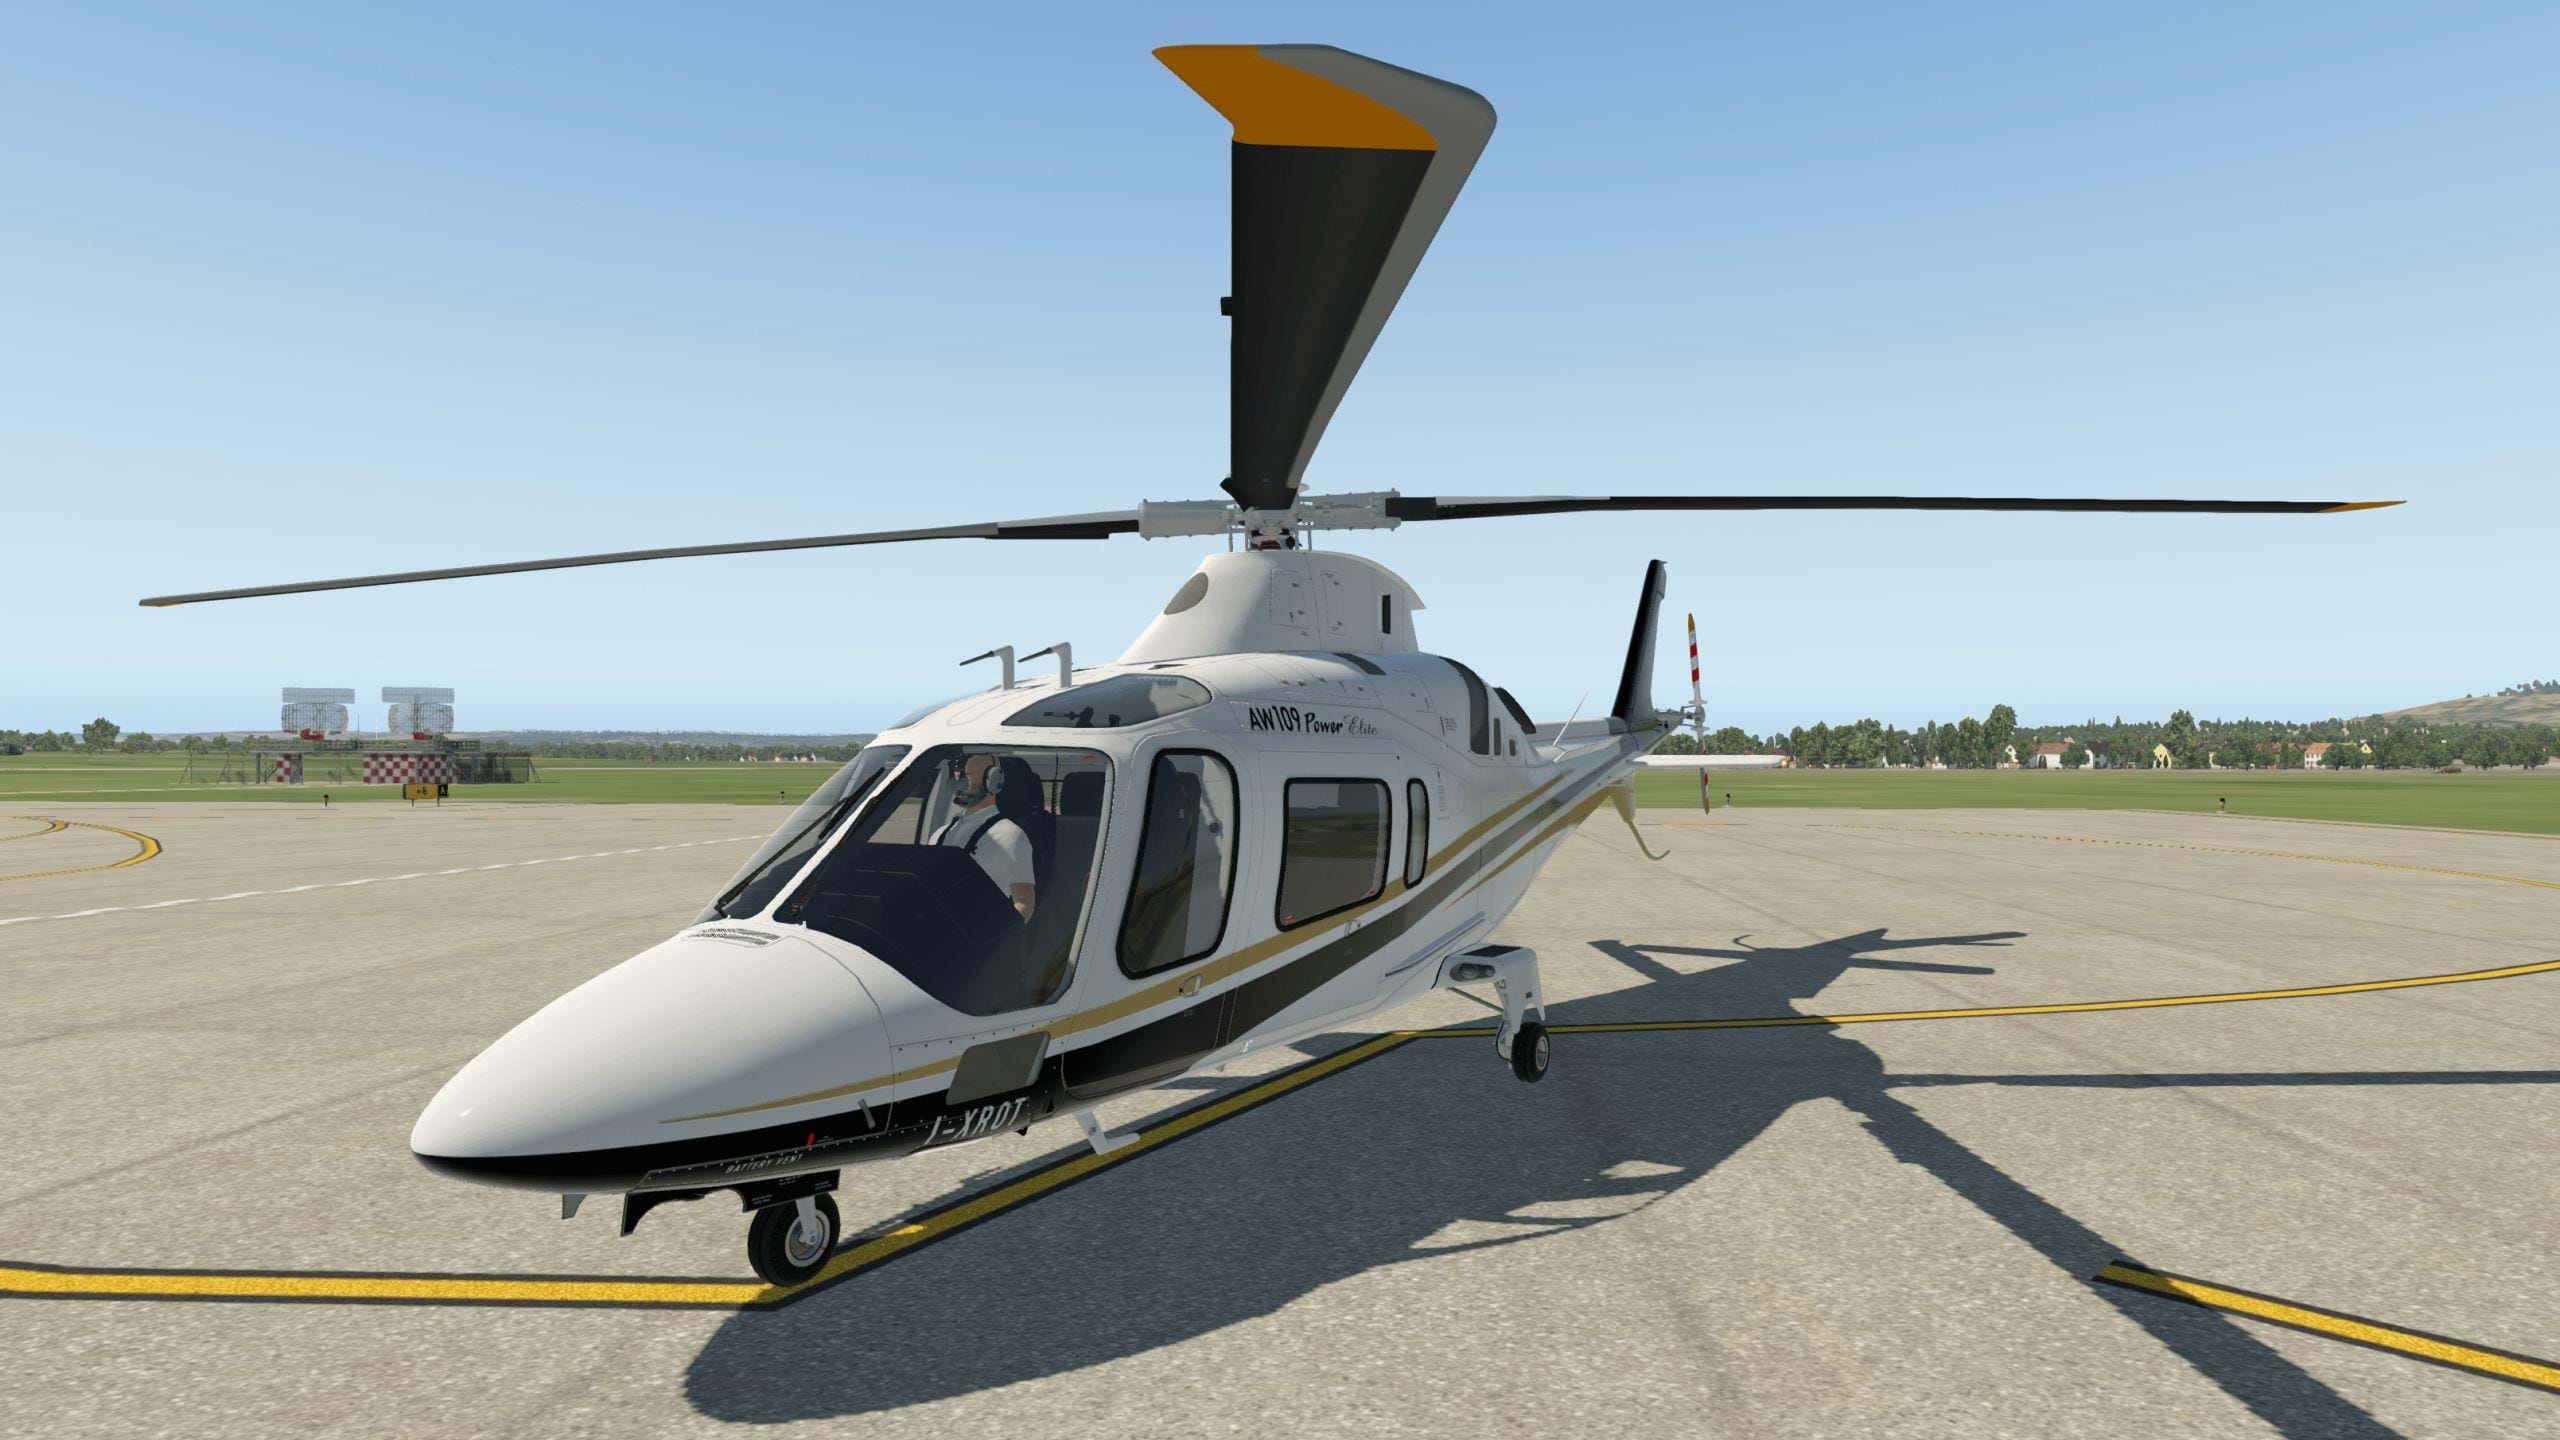 X-Rotors AW109 for X-Plane